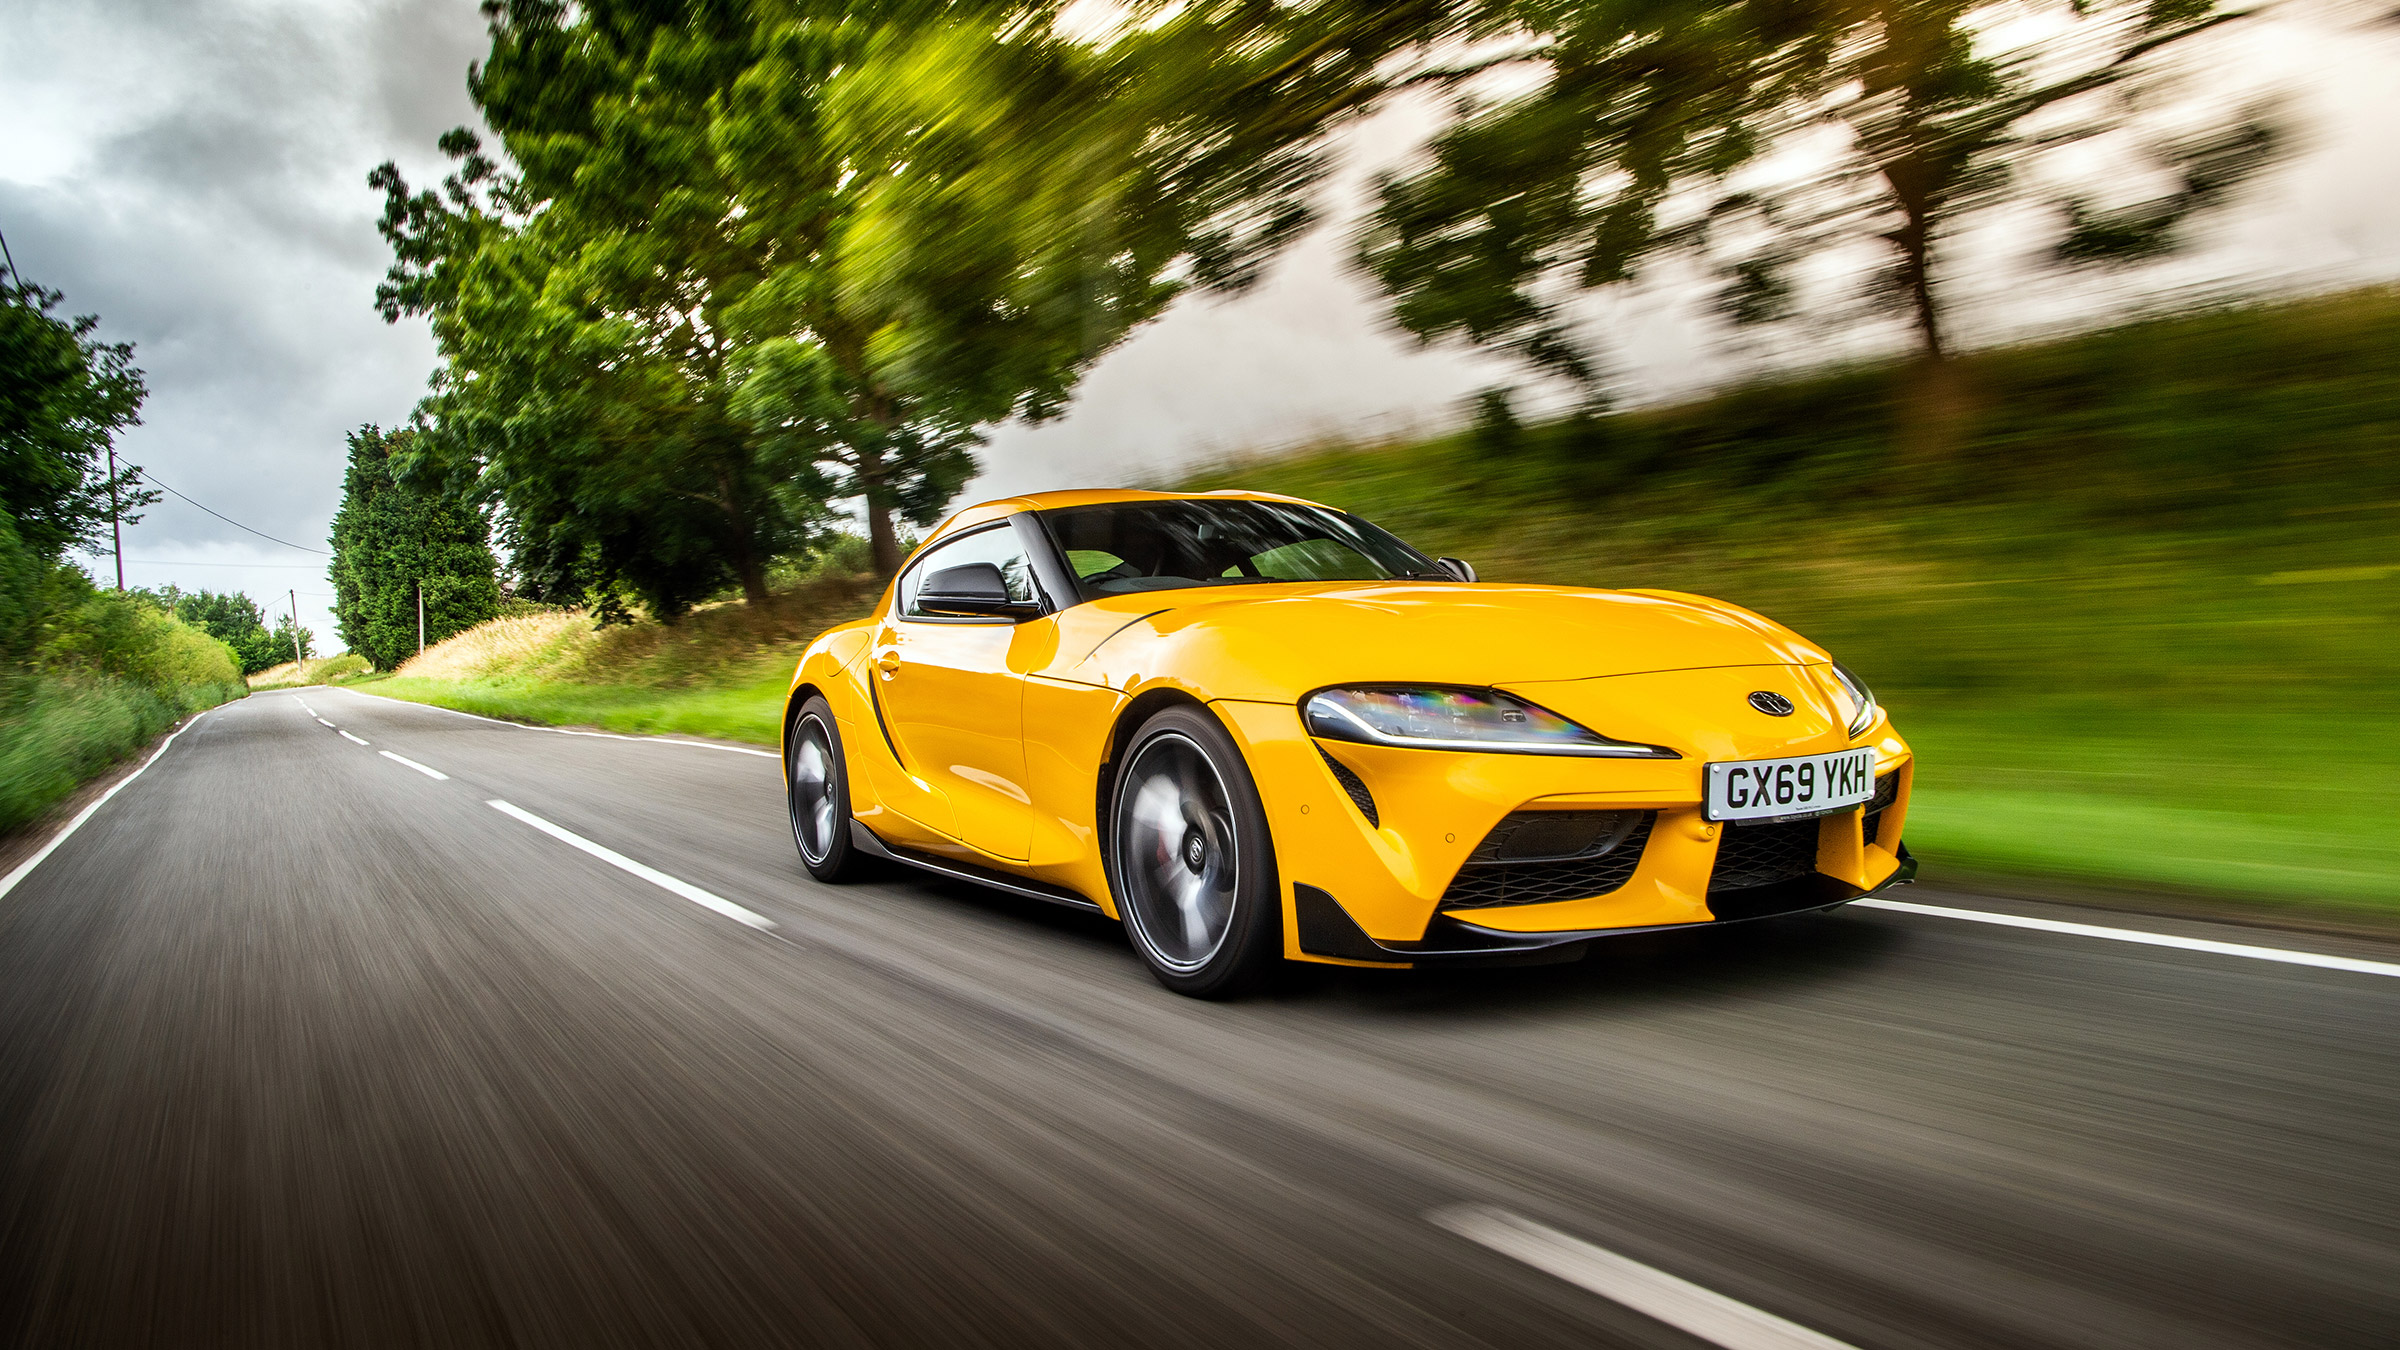 Toyota GR Supra review - Japan's sports car hero driven on road and